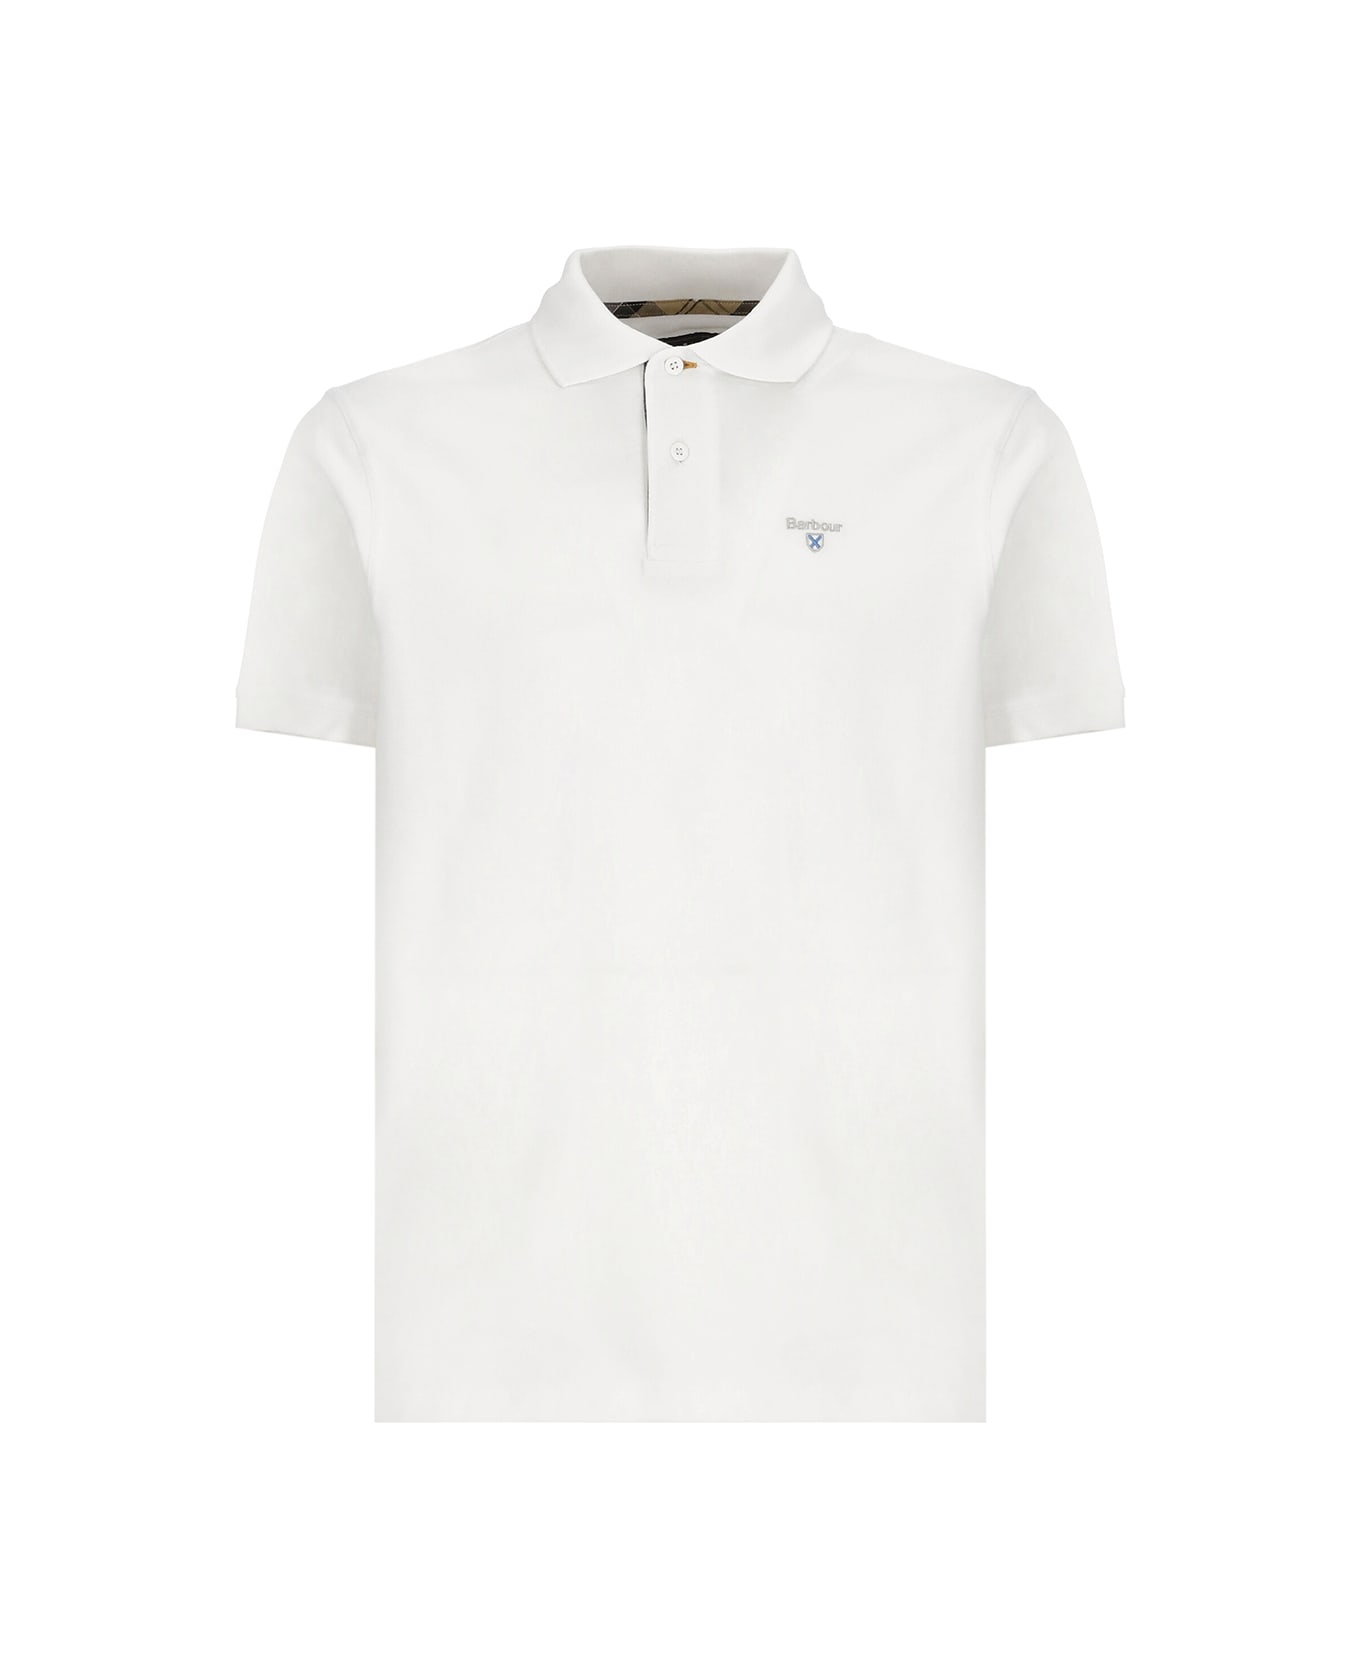 Barbour Logoed Polo Shirt - White ポロシャツ